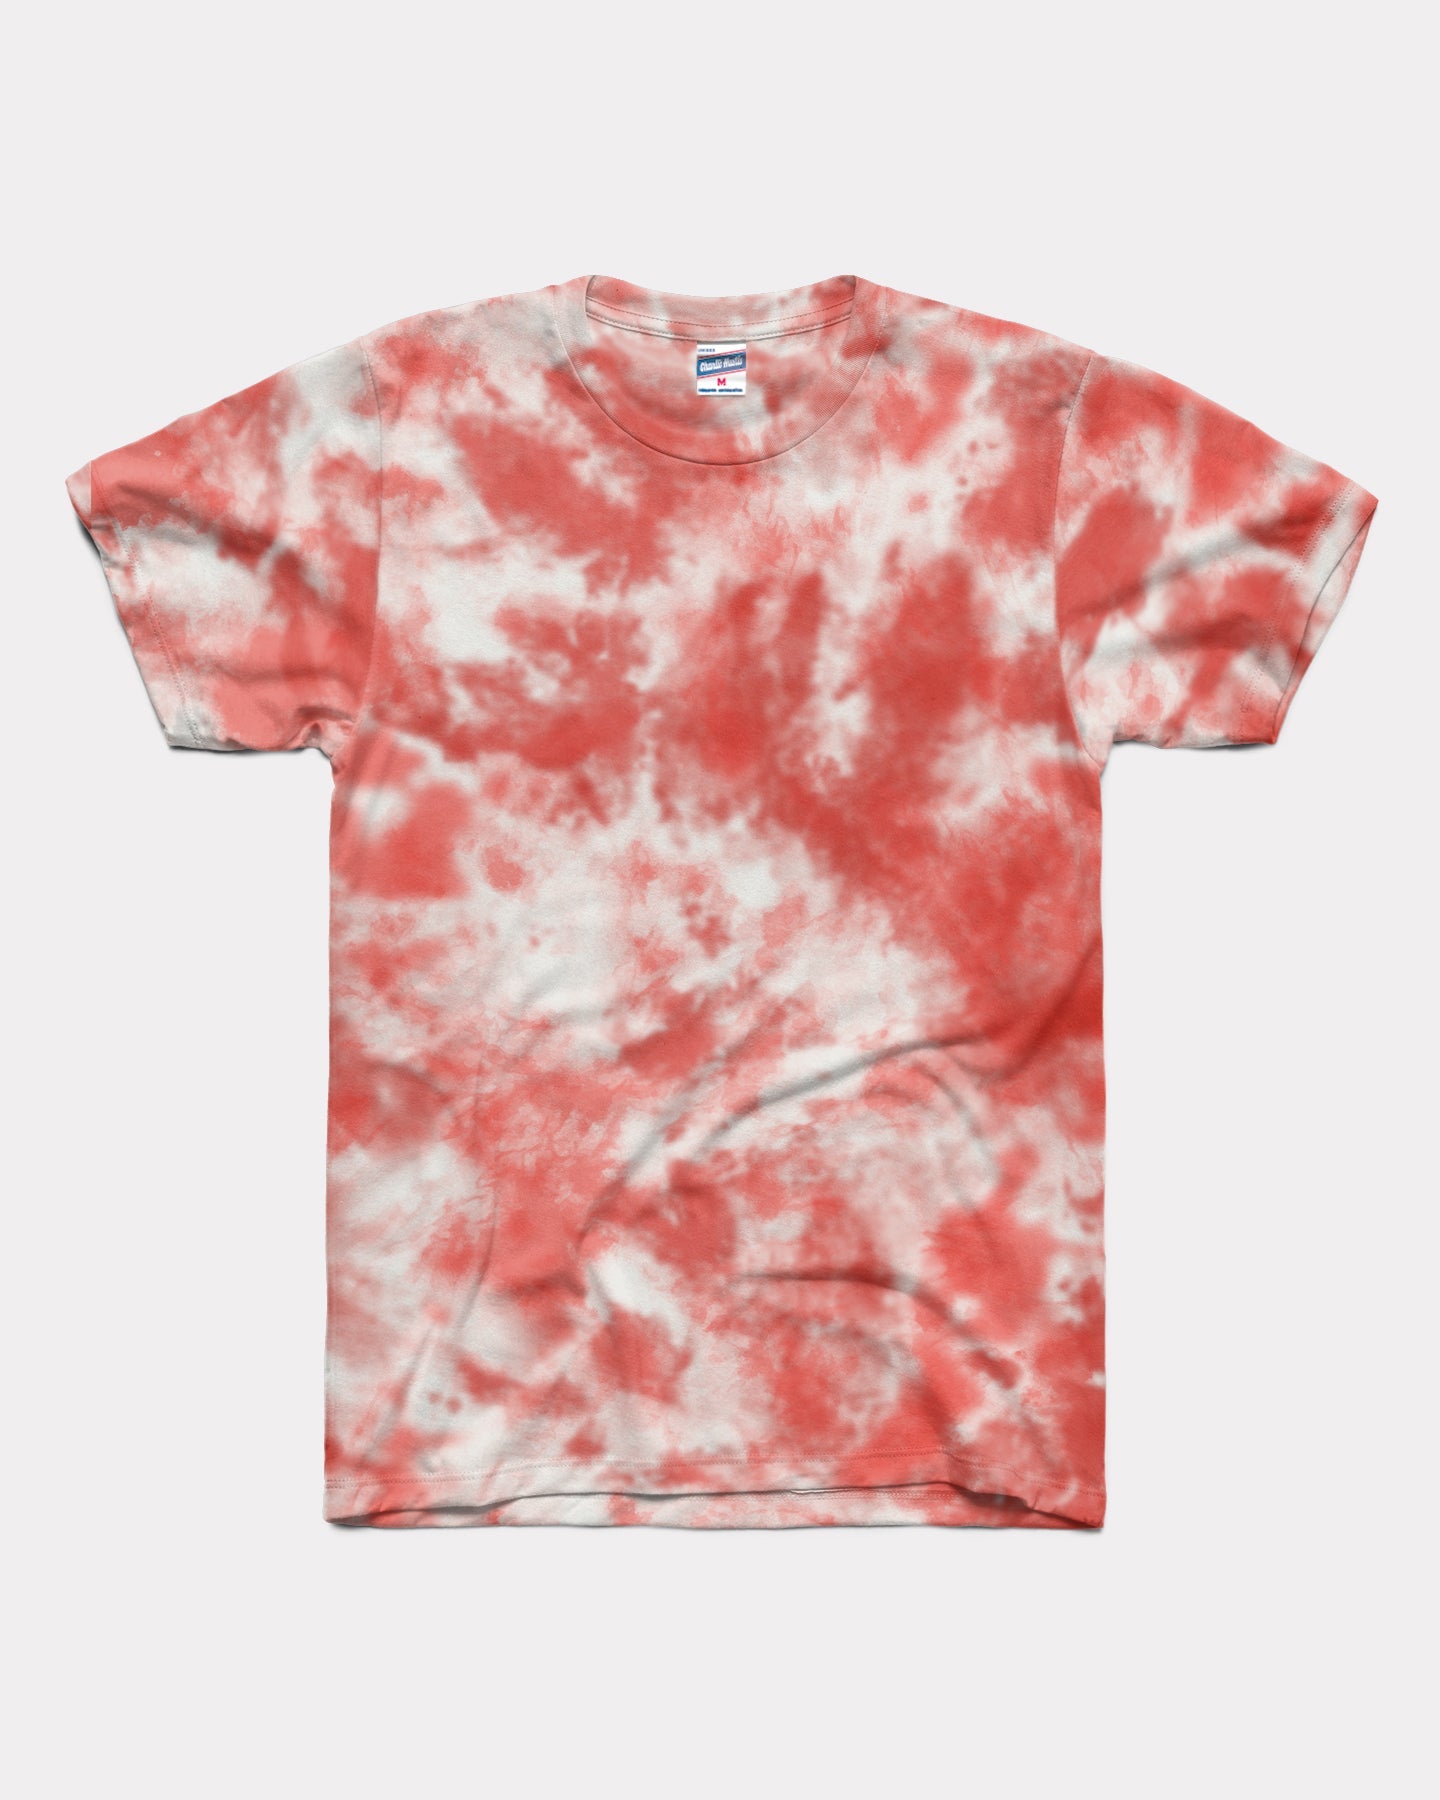 Red And White Tie Dye Vintage T Shirt Charlie Hustle